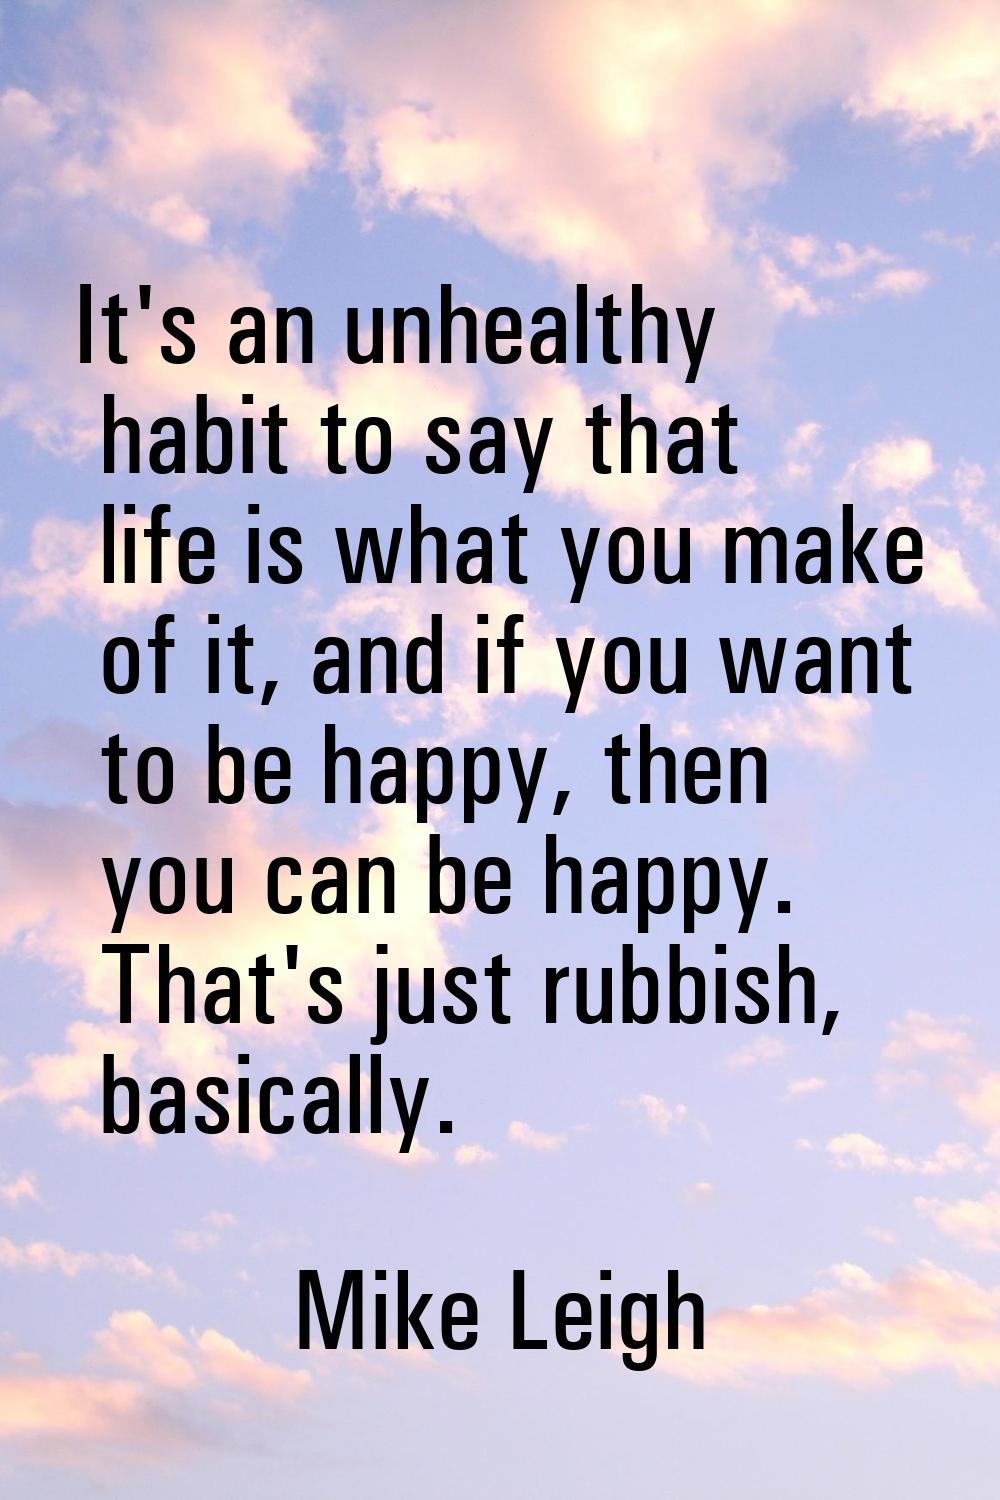 It's an unhealthy habit to say that life is what you make of it, and if you want to be happy, then 